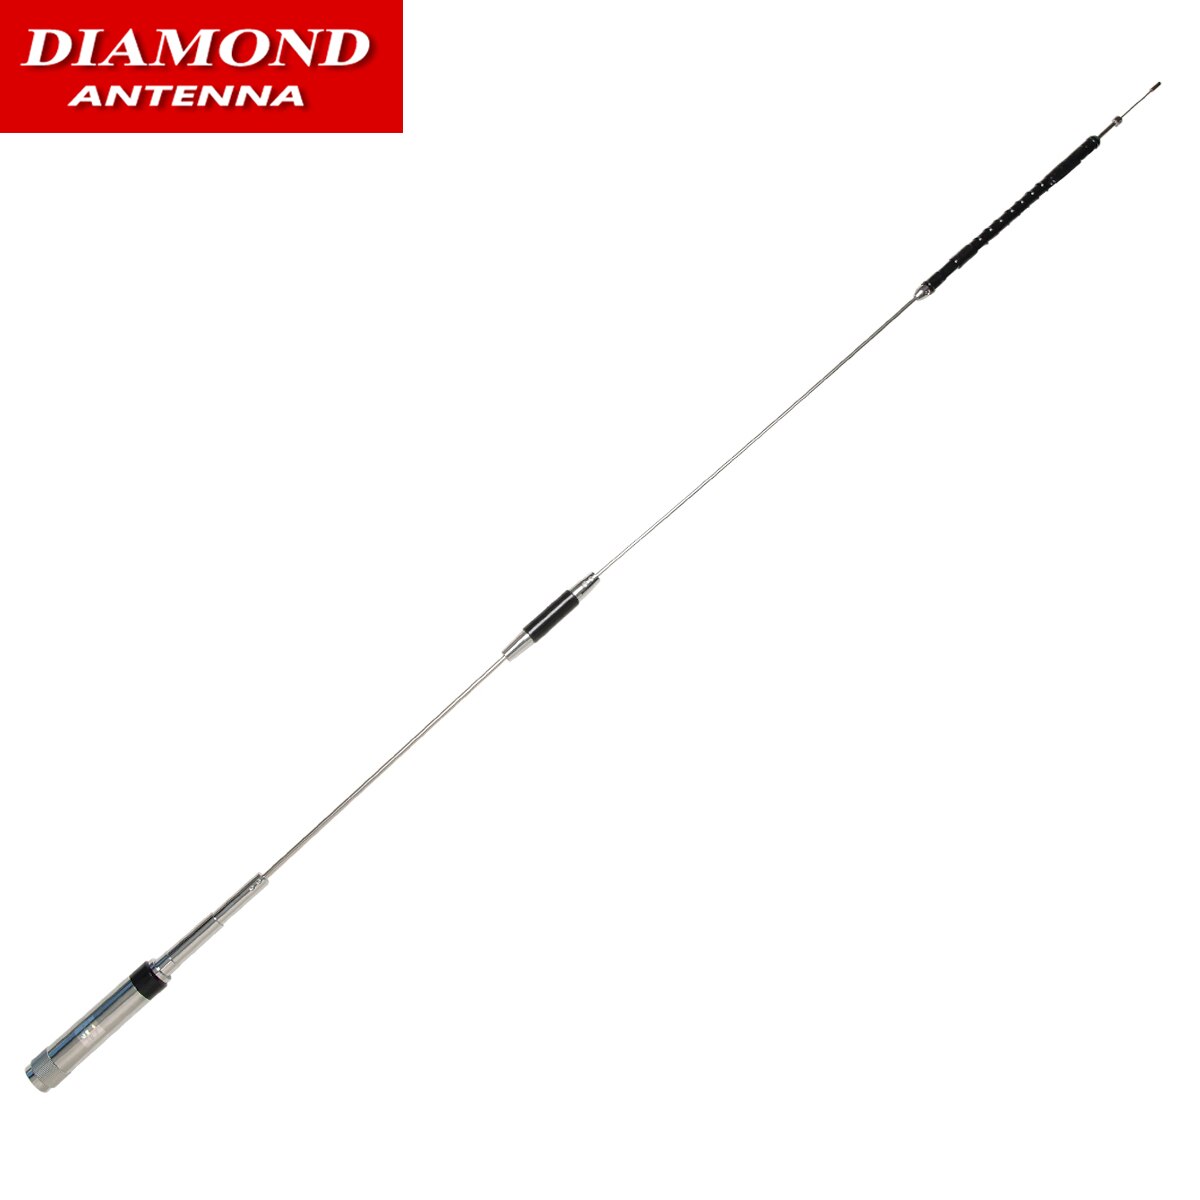 Diamond CR8900 Quad Band Mobile Vehicle Car Antenna 29.6/50.5/144/435MHz CR-8900 for 4 Band Frequency Mobile Car Radio